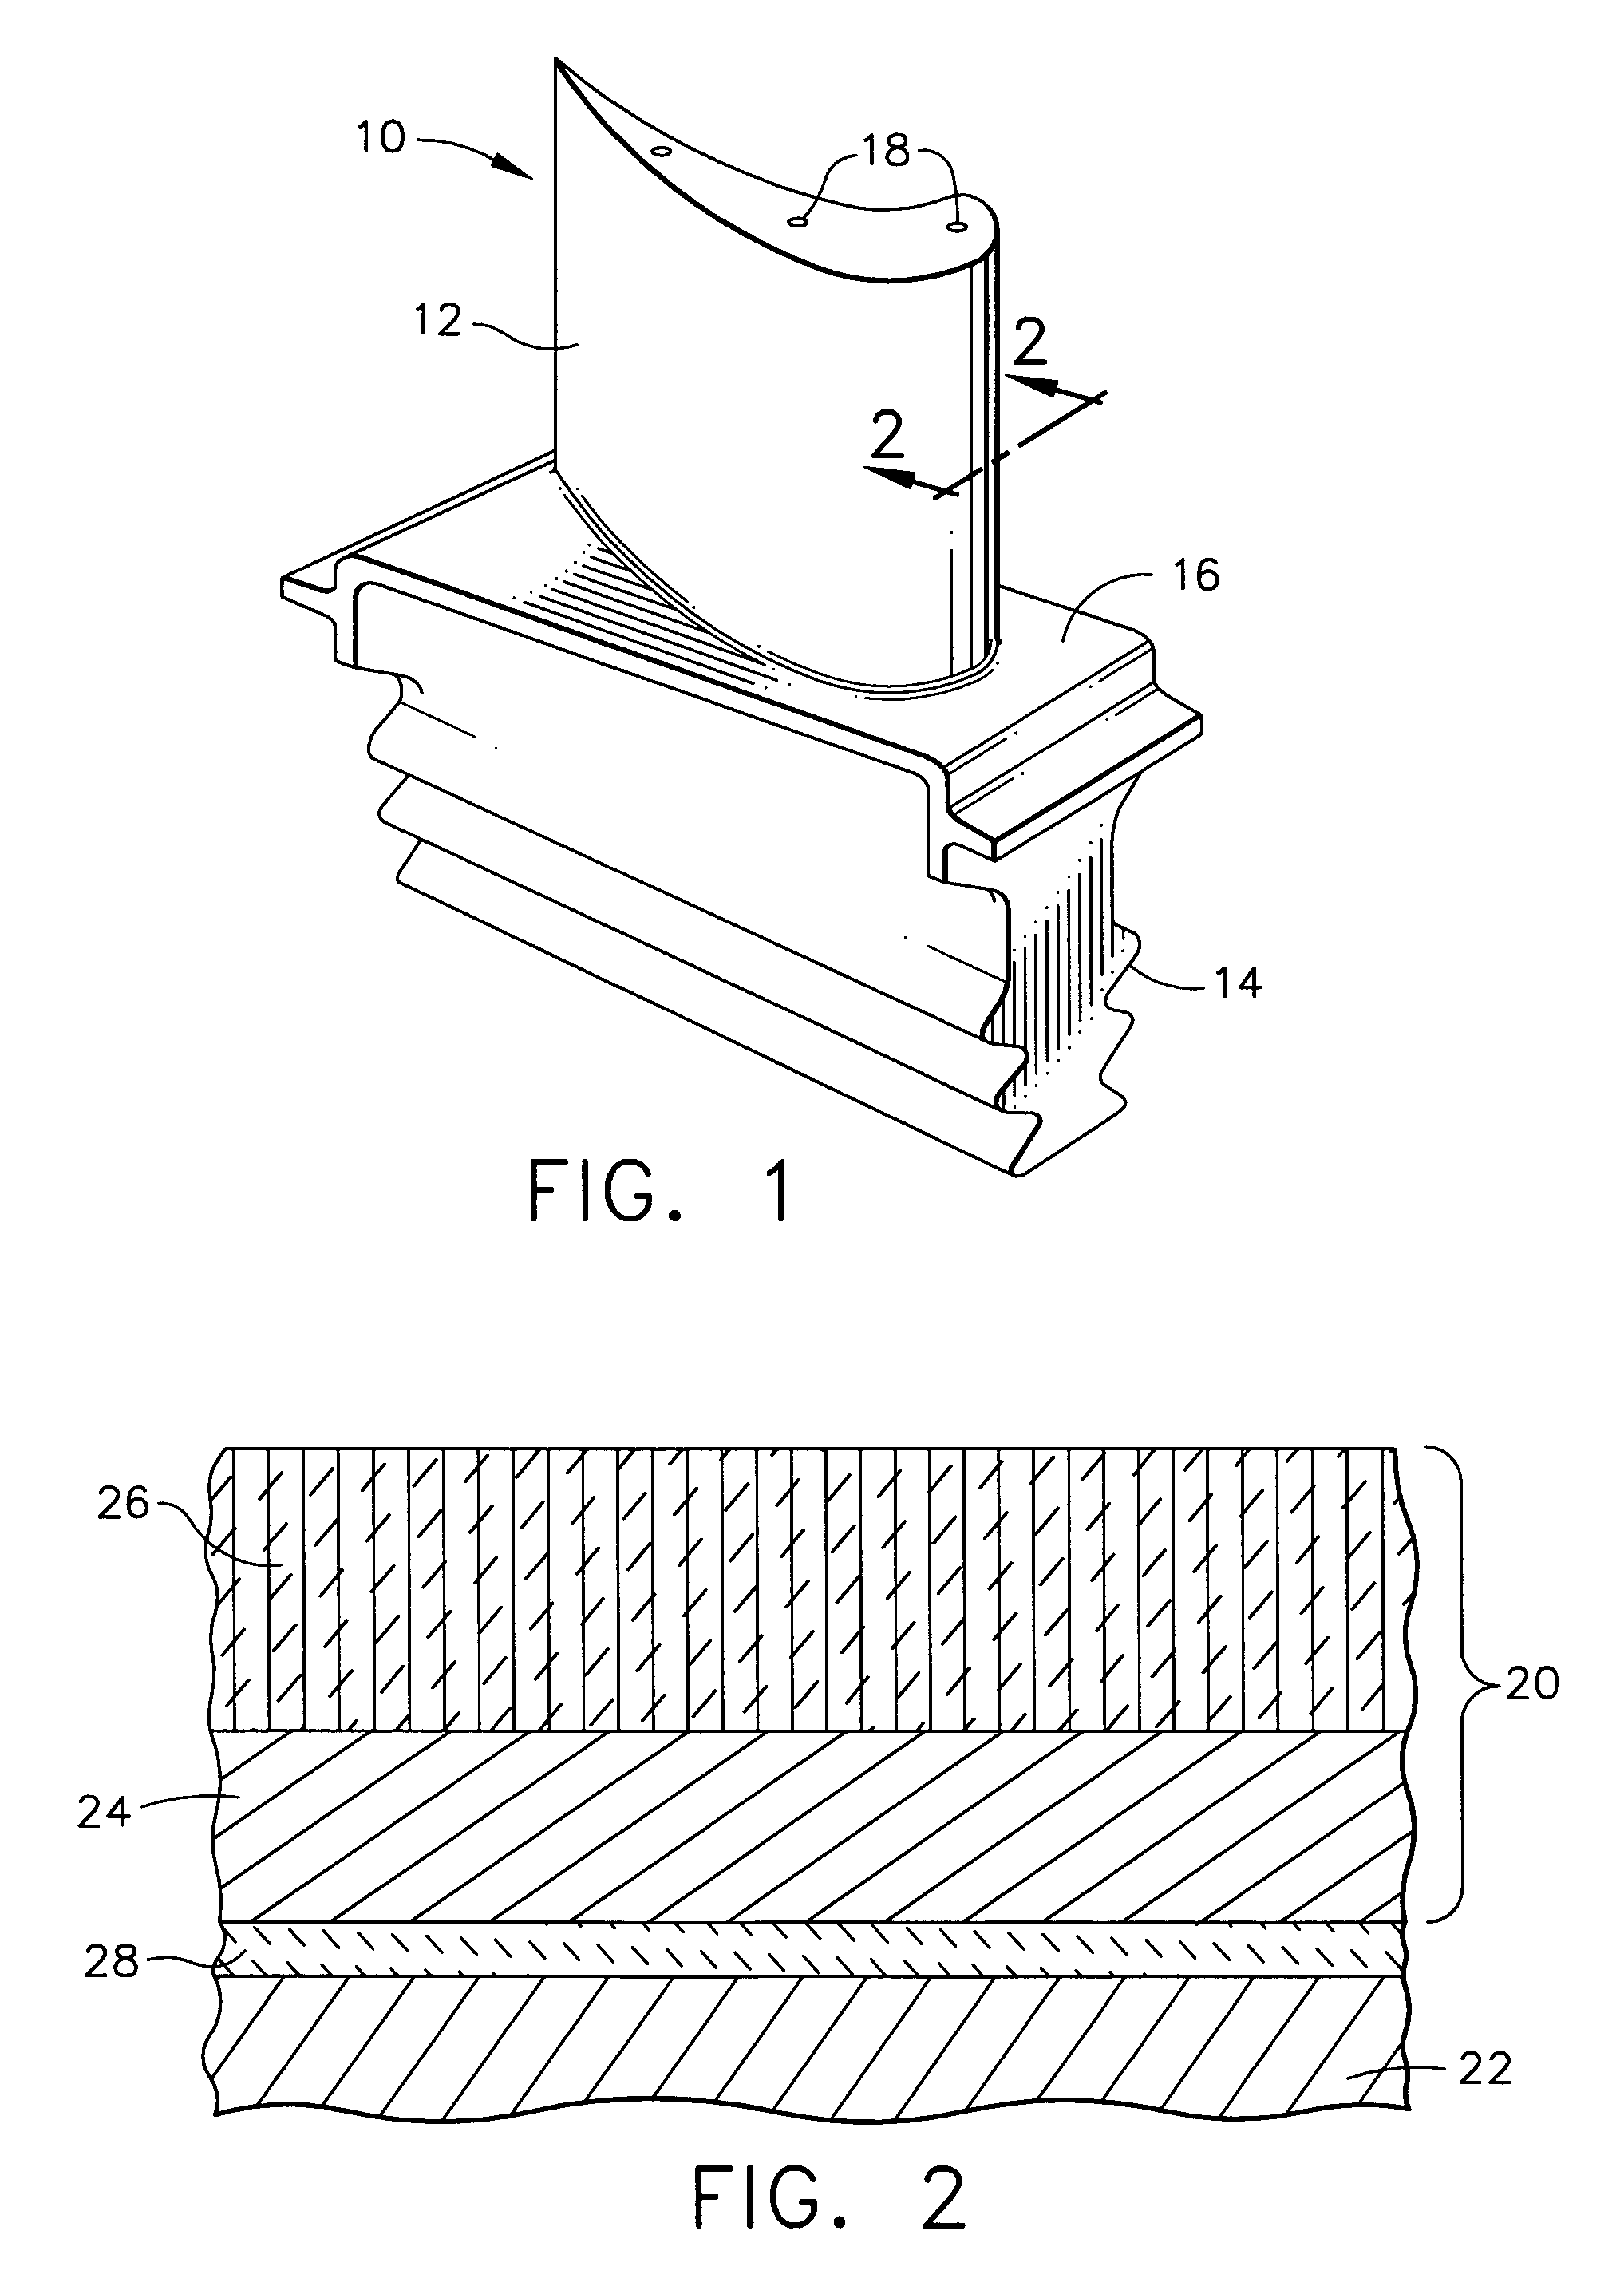 Diffusion barrier and protective coating for turbine engine component and method for forming